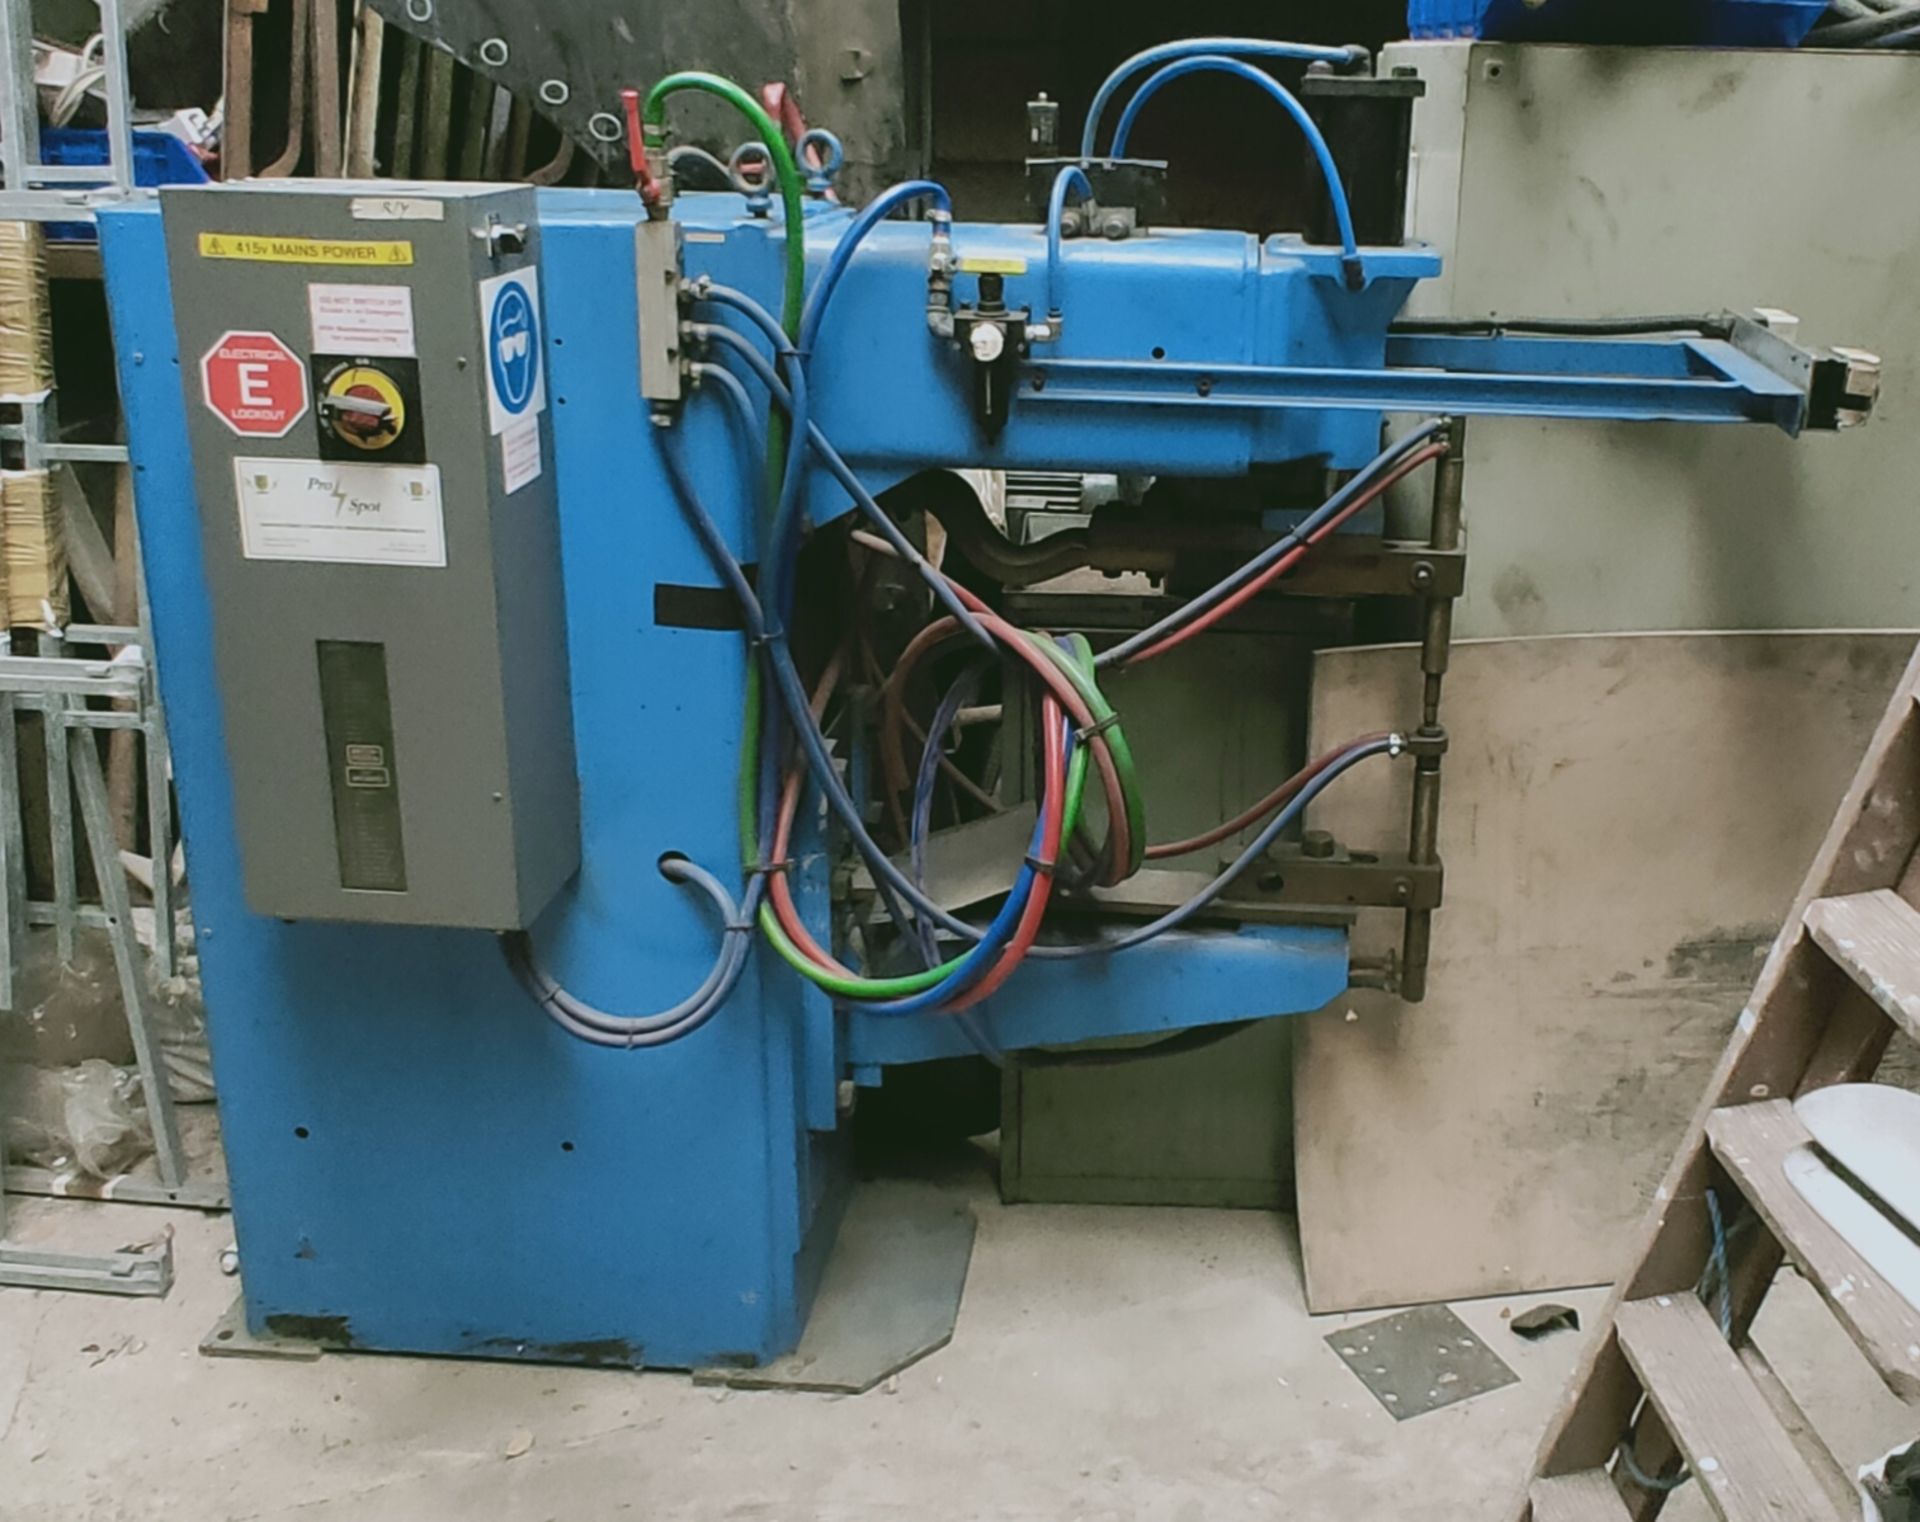 British Federal WS2000 Spot Welder, approx. 160cm x 180cm x 65cm, loading free of charge - yes (